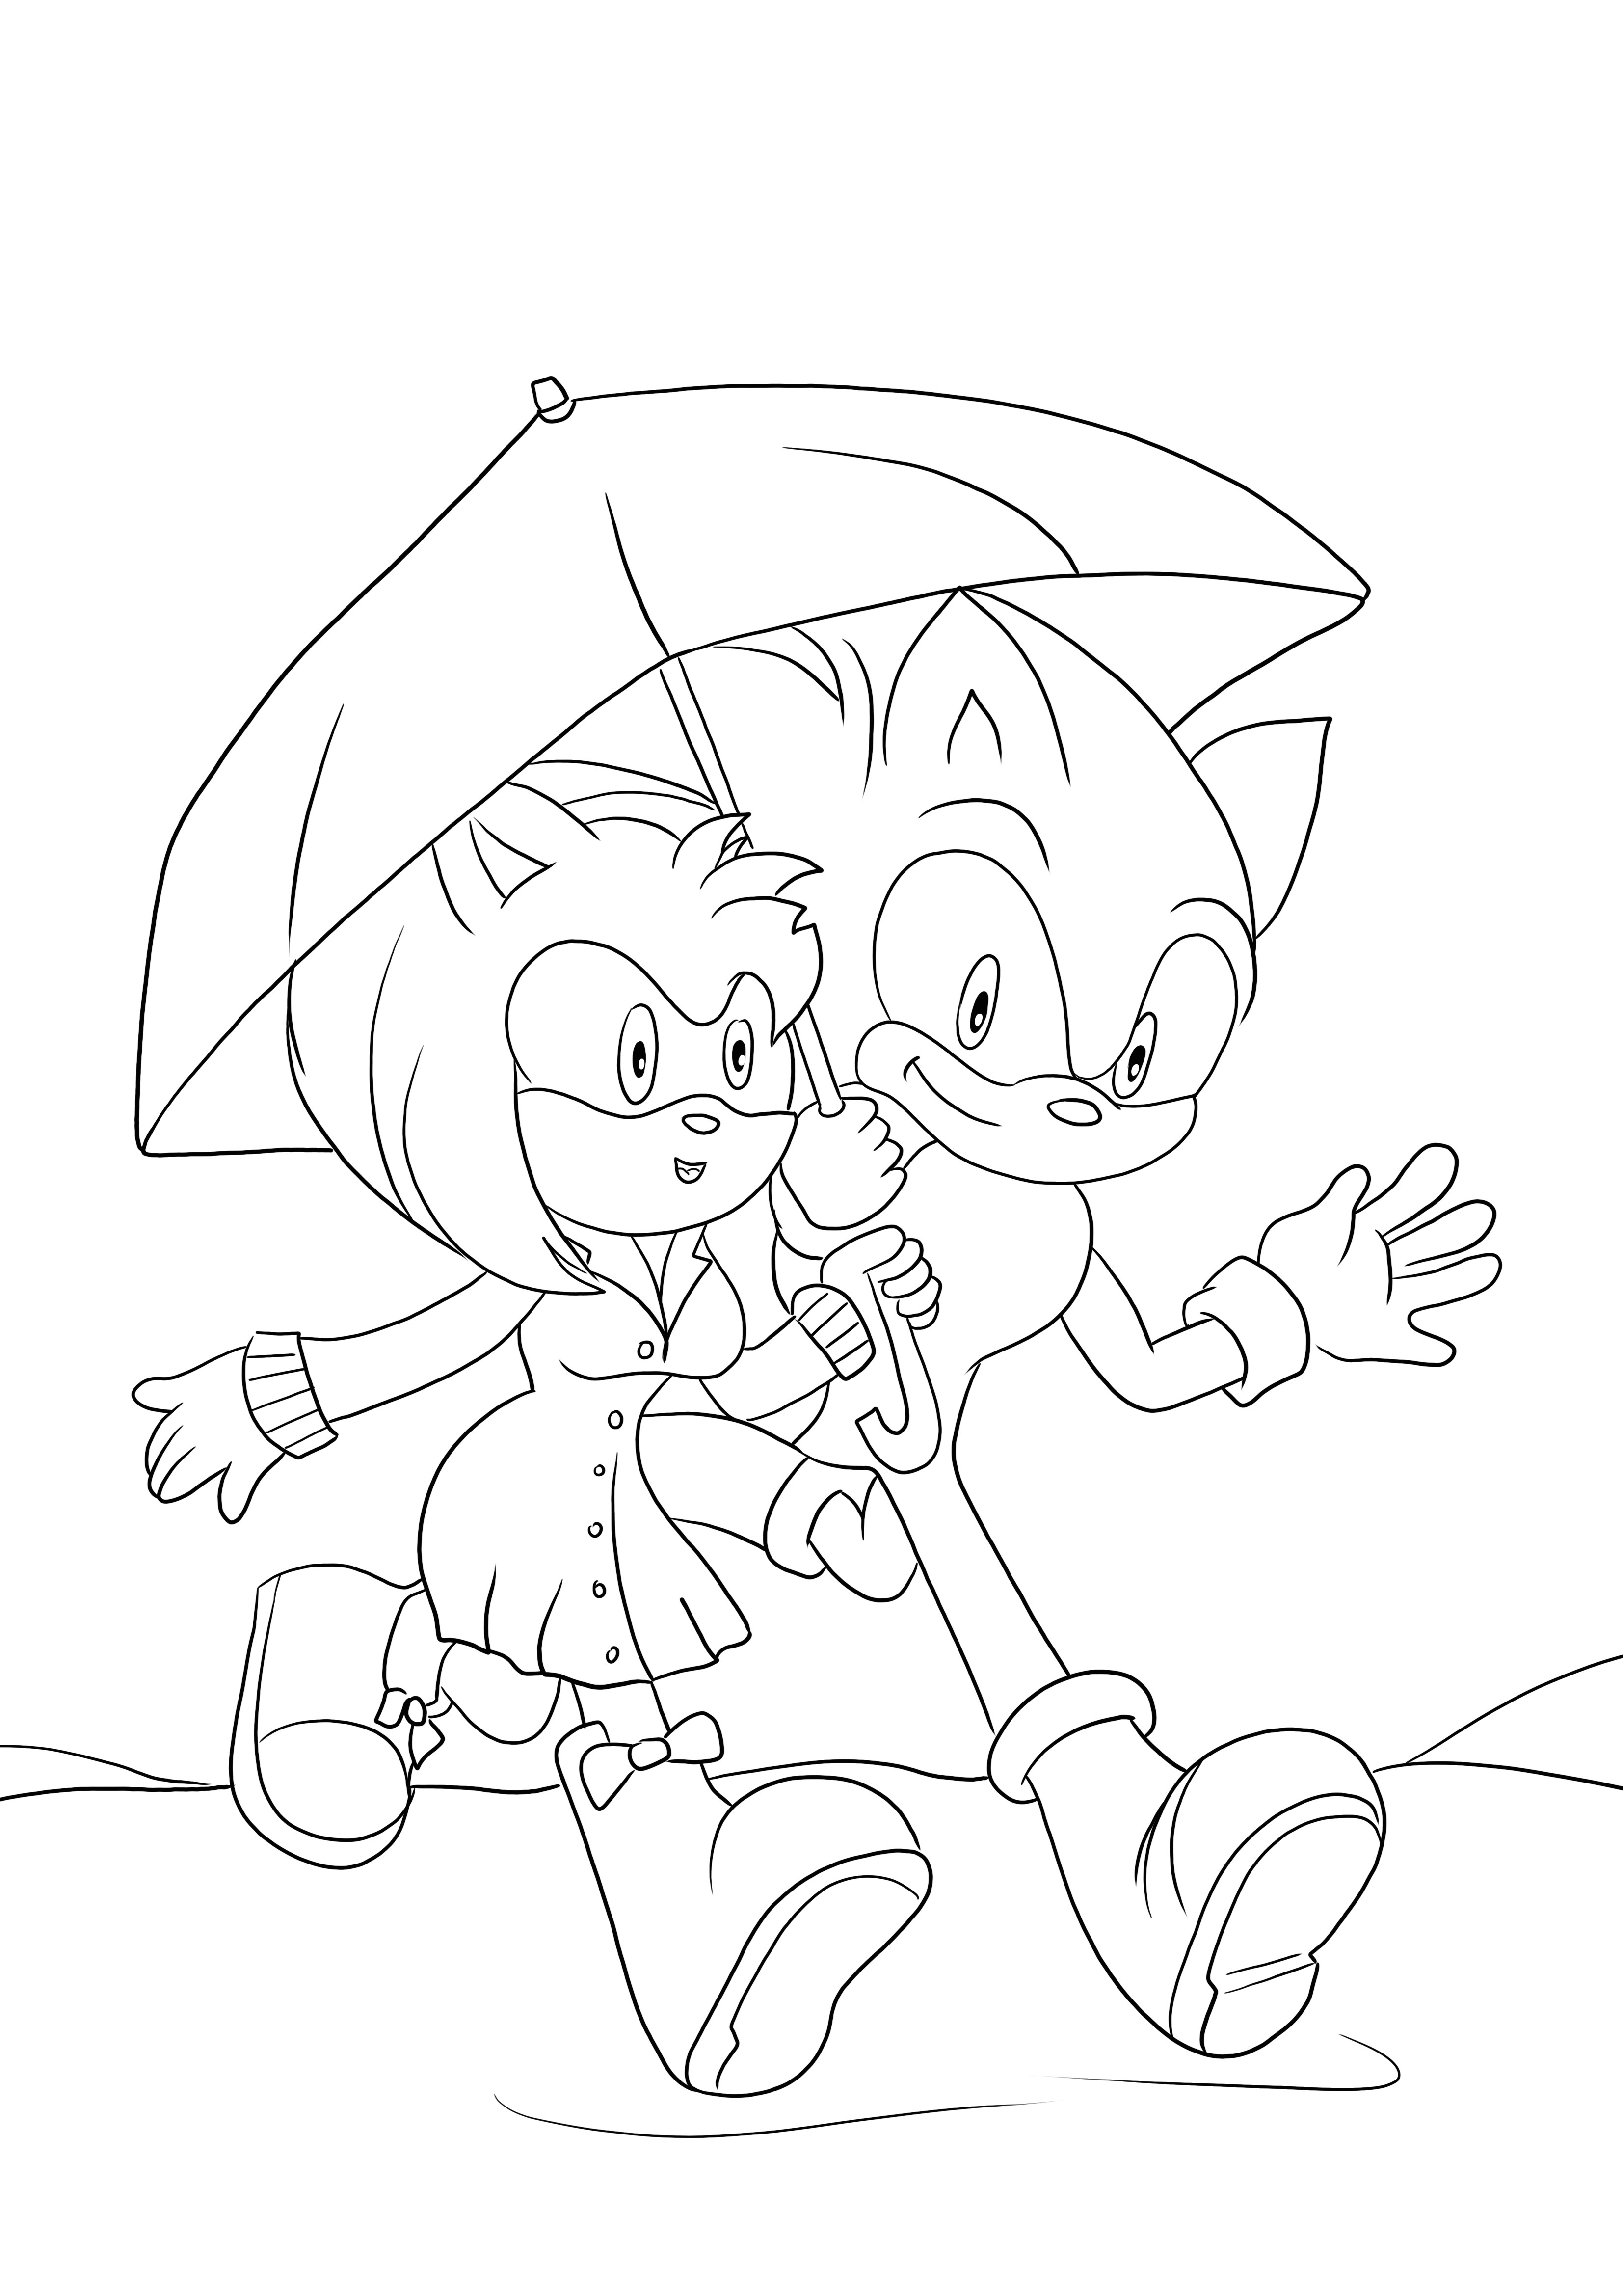 Amy Rose and Sonic under umbrella free coloring and printing page for kids